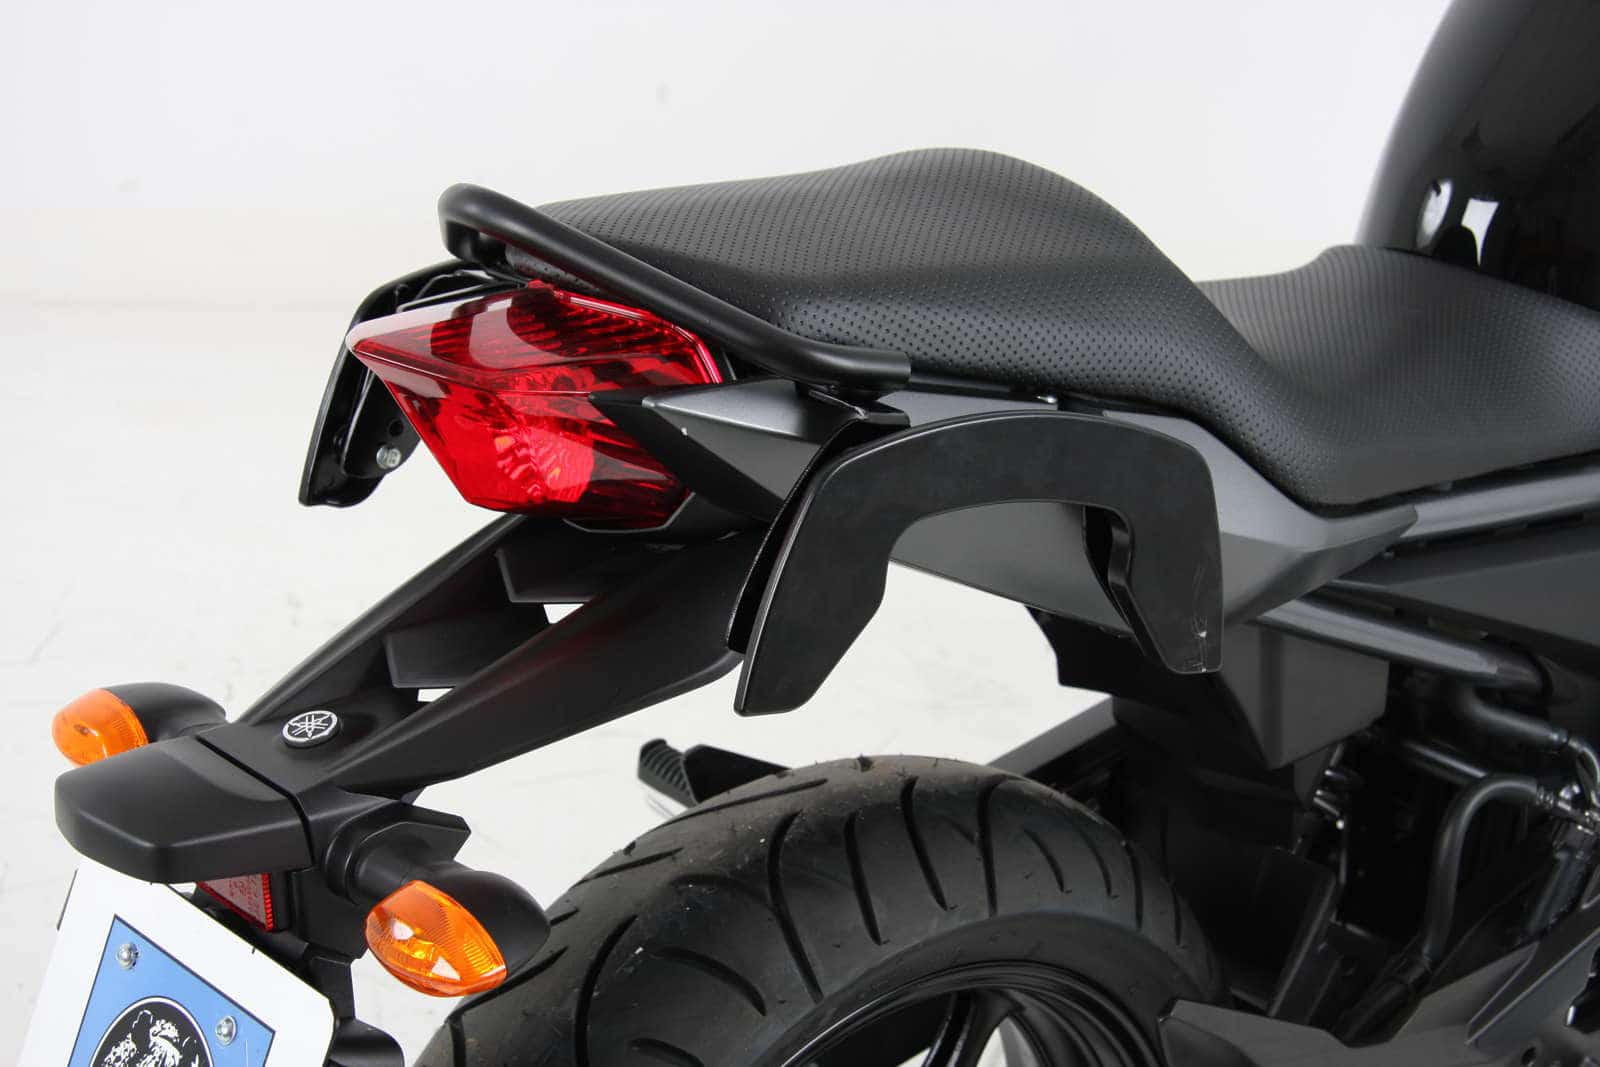 C-Bow sidecarrier for Yamaha XJ 6 Diversion (2009-2016)